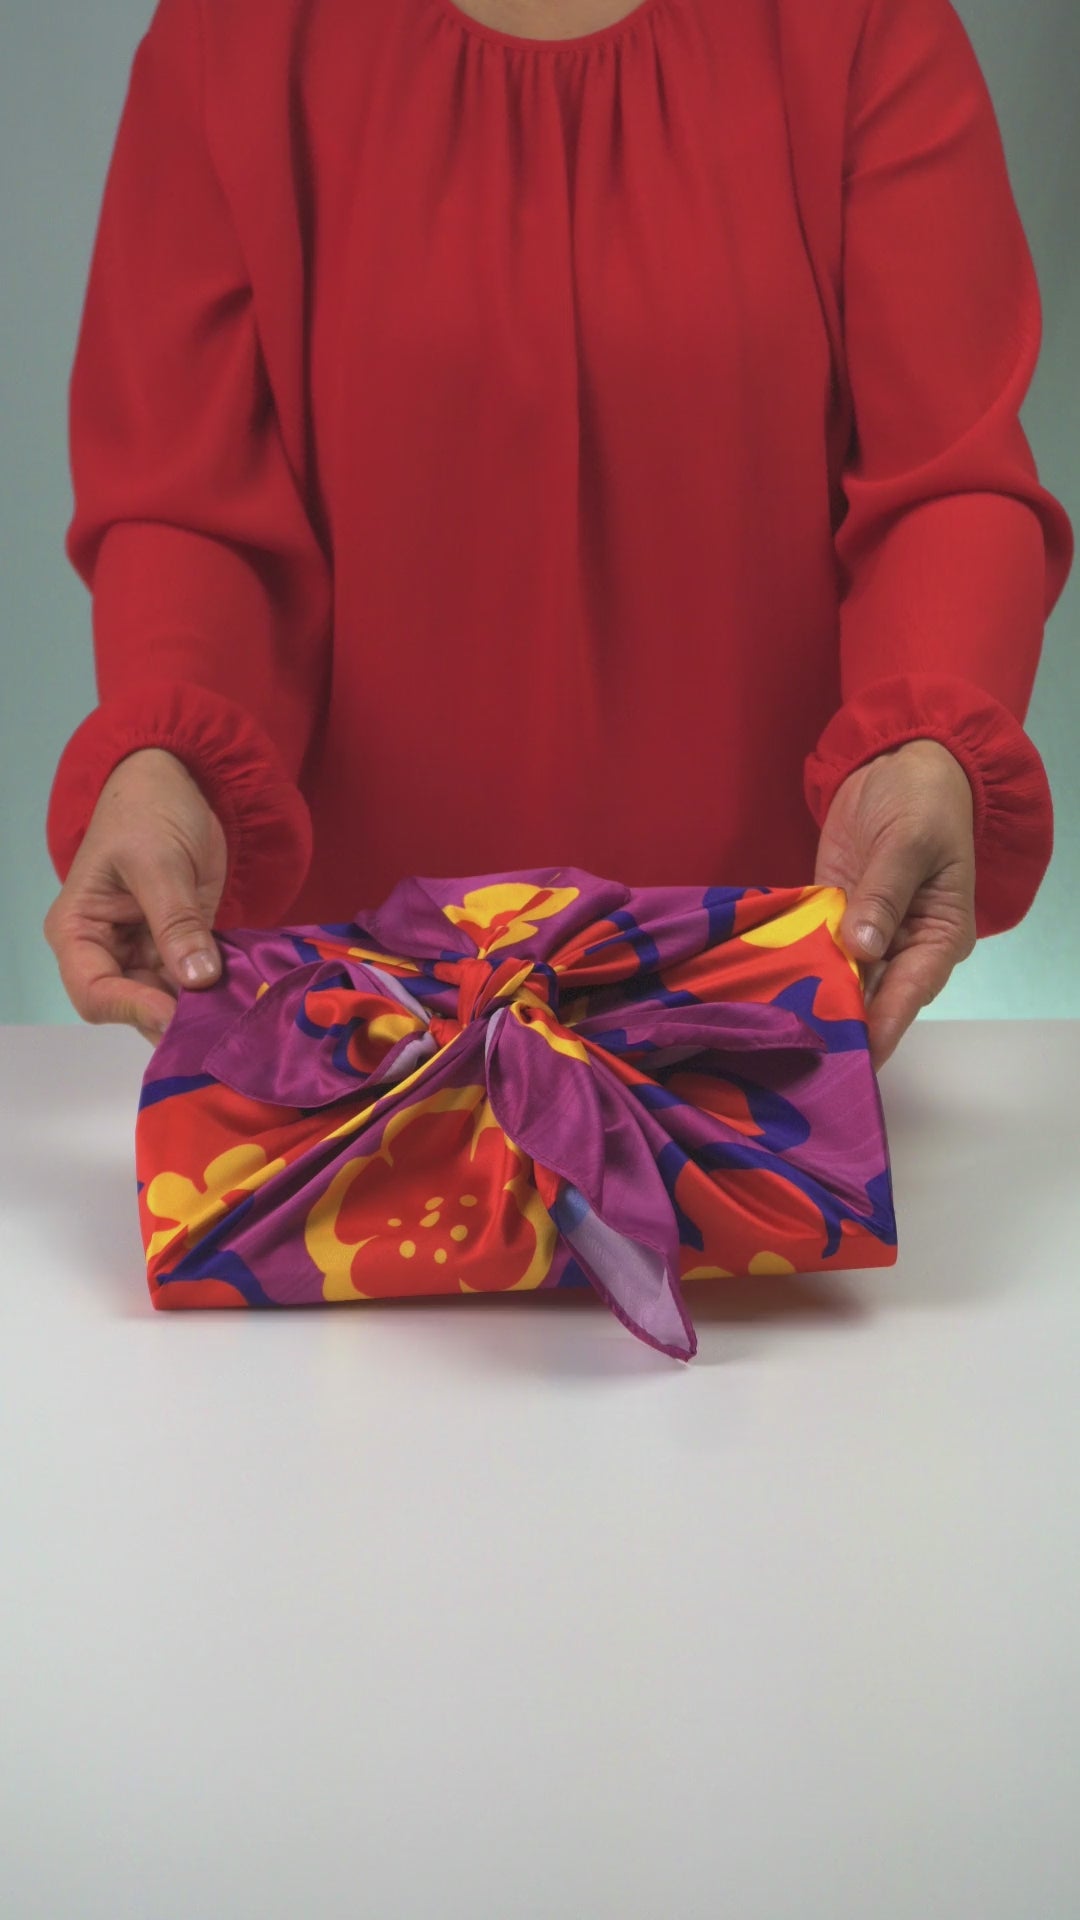 Furoshiki Gift Wrapping: A Step-By-Step Guide